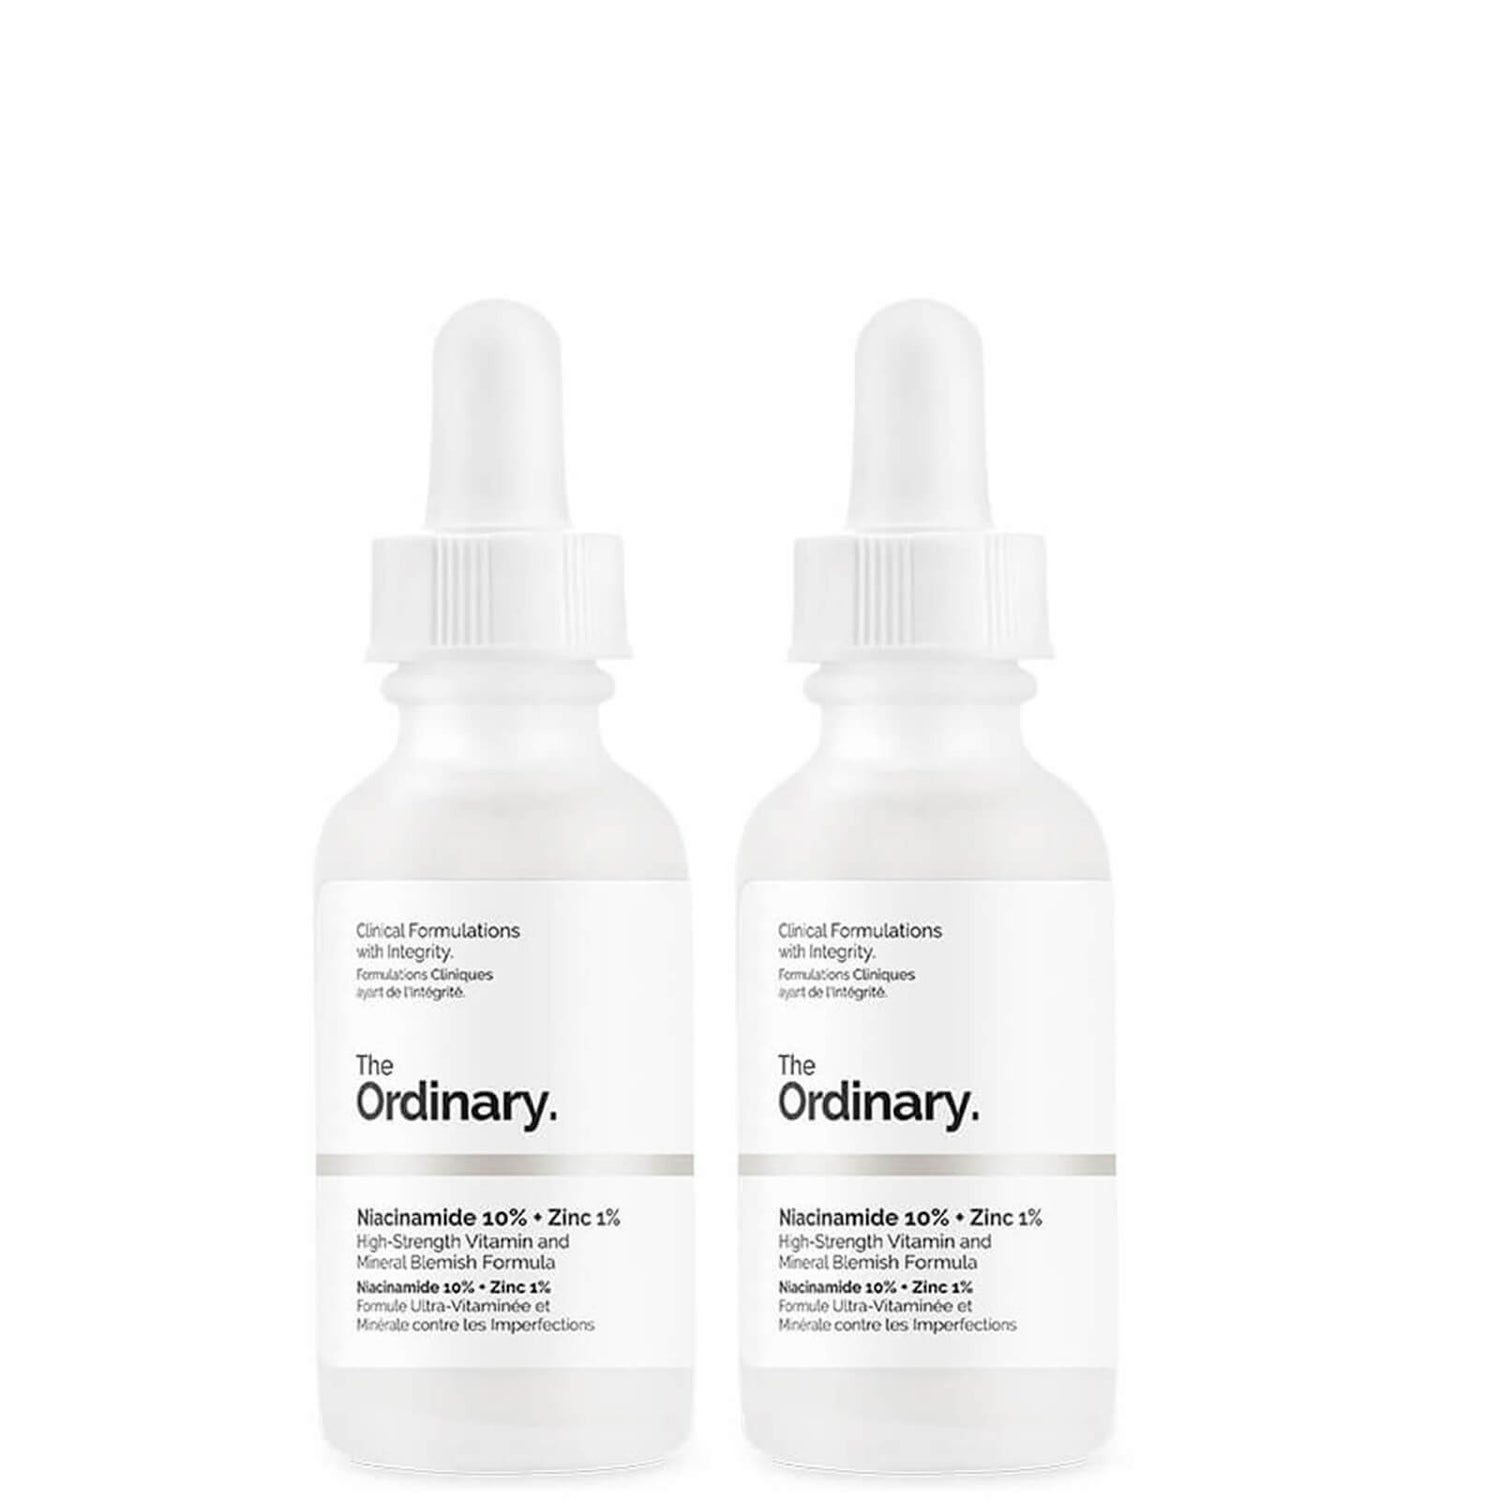 The Ordinary Niacinamide 10 % + Zinc 1 % High Strength Vitamin and Mineral Blemish Formula Duo